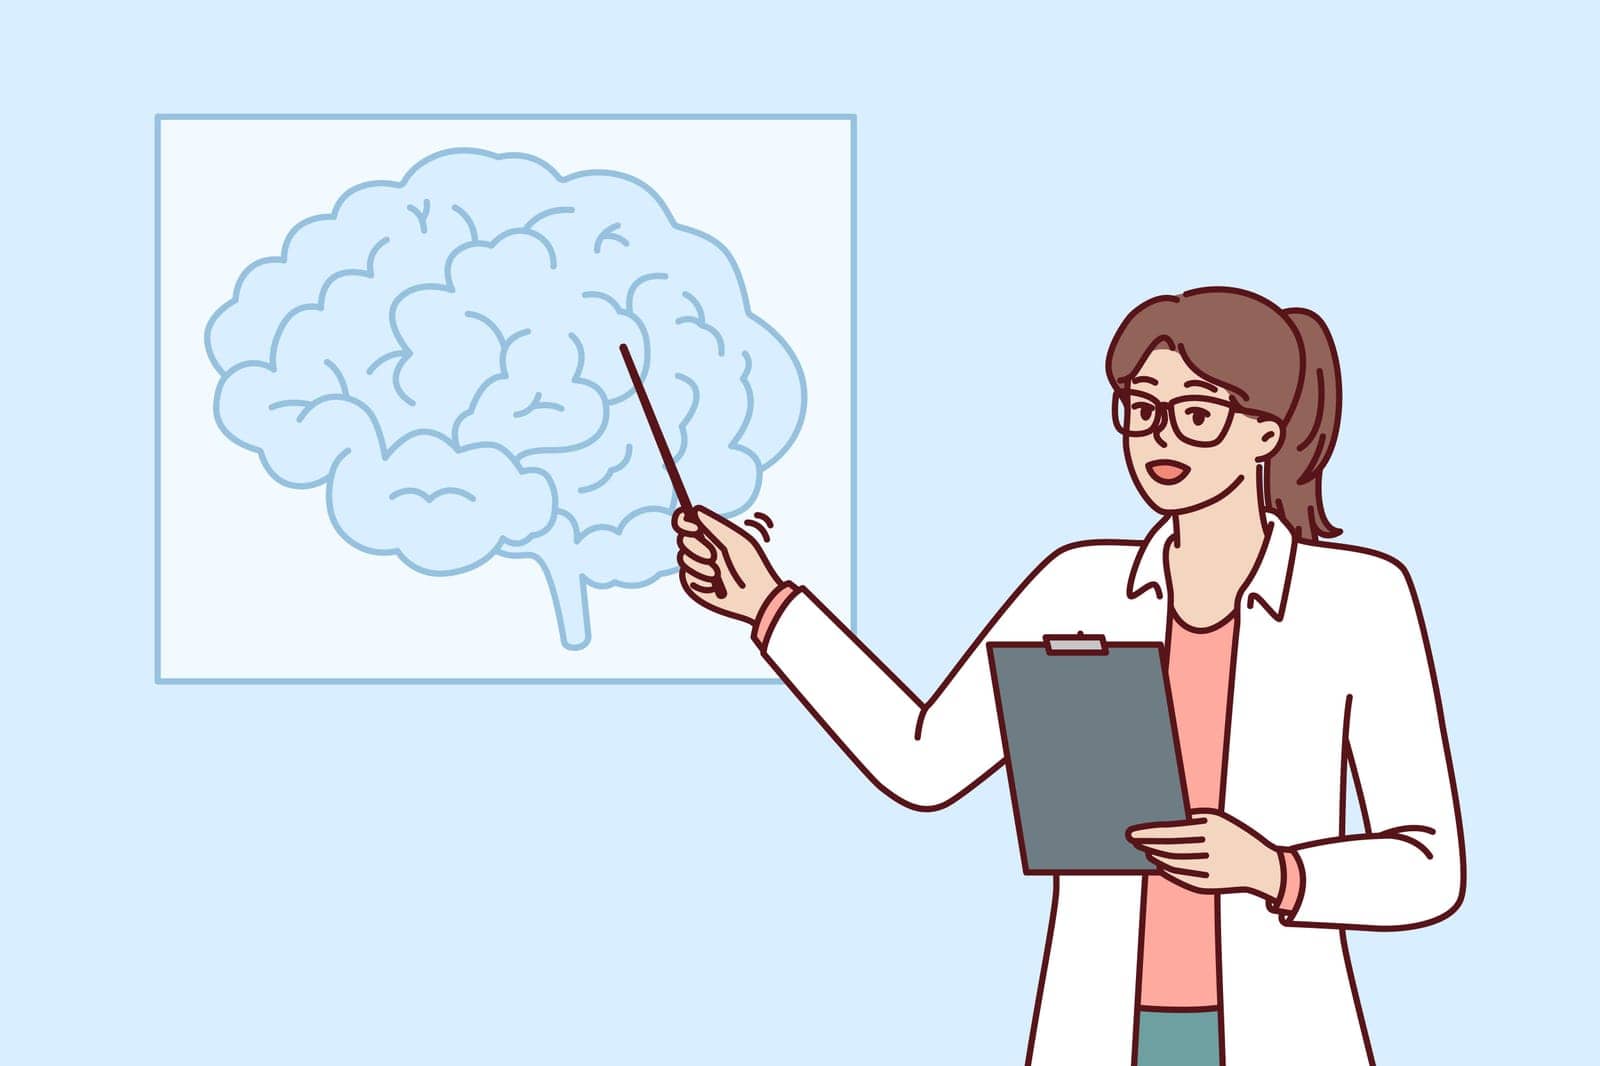 Woman doctor teaches neurology pointing at brain drawing hanging on wall during medical education course. Doctor neurologist shows picture of brain to ask colleagues for advice